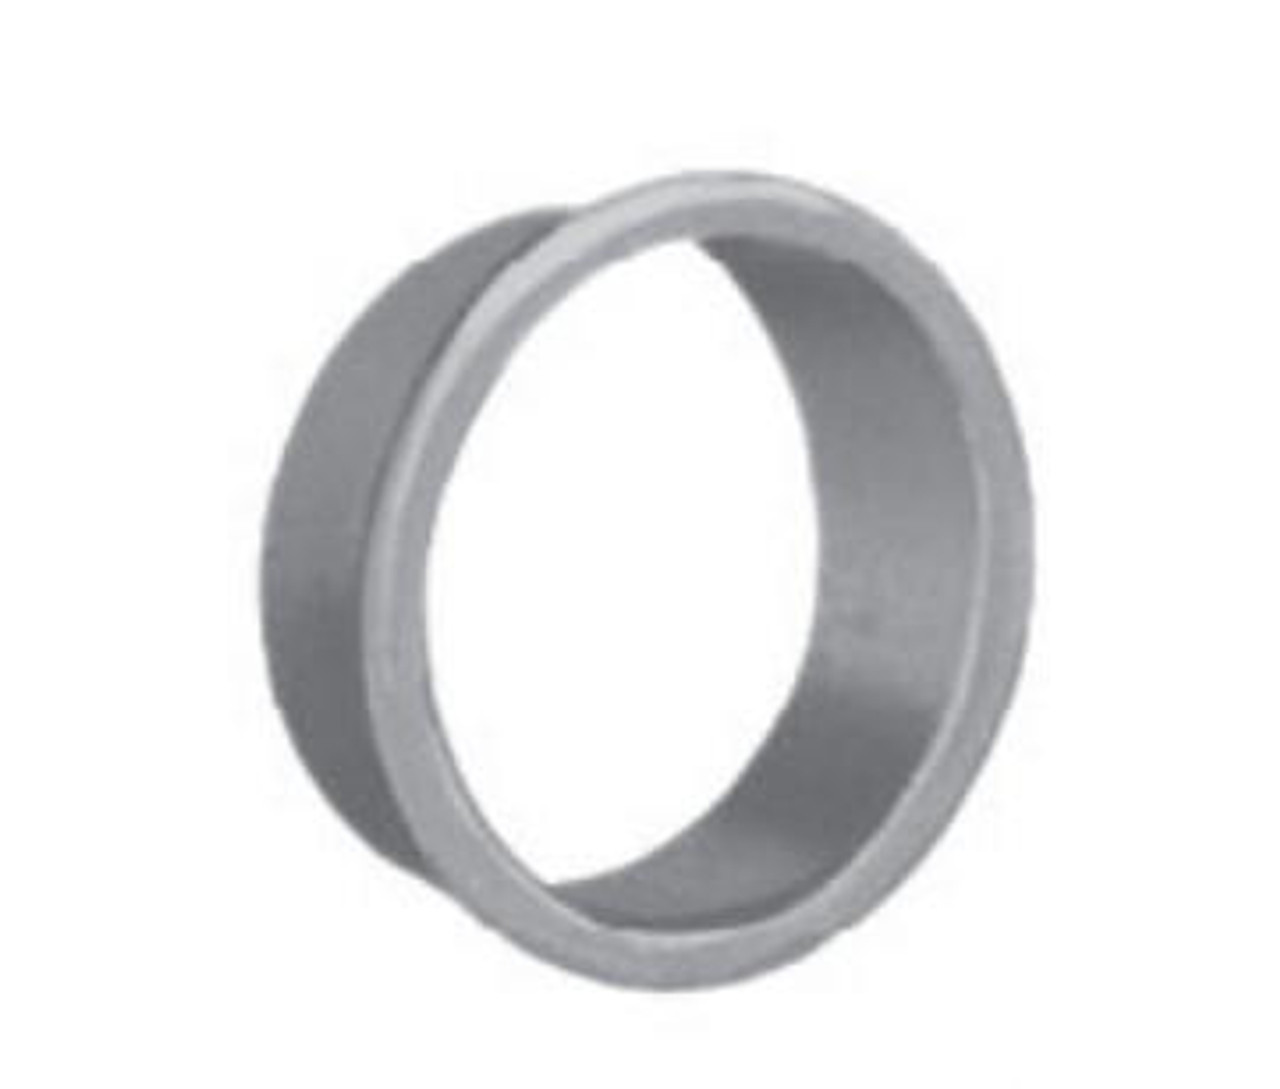 Compx Security Products Compx Trim Ring C2018 